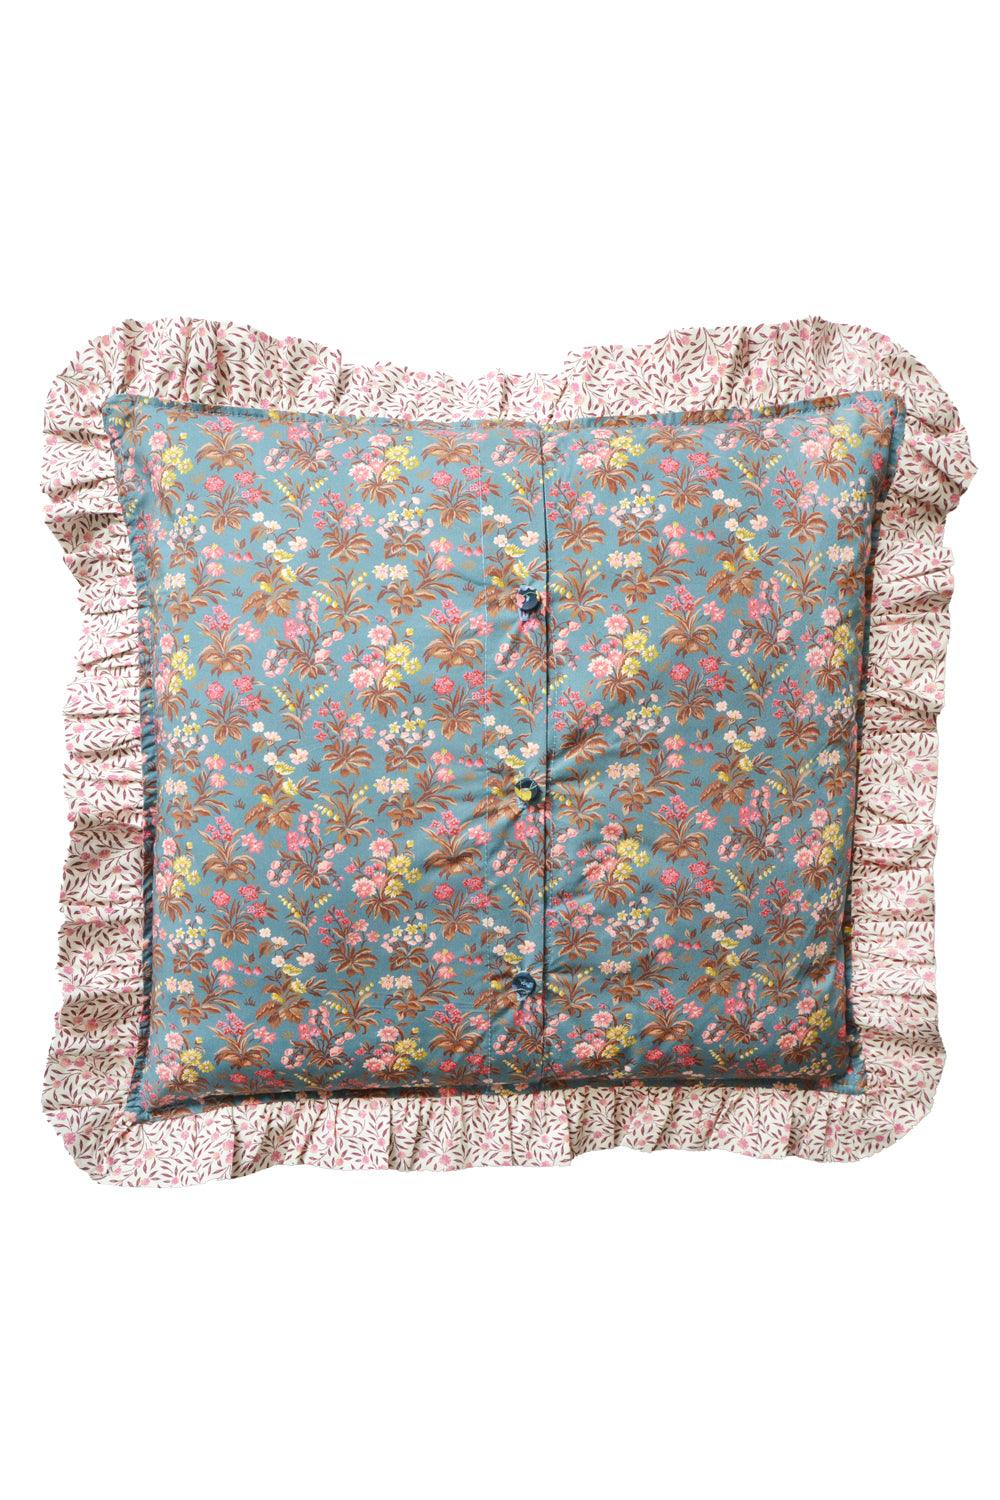 Ruffle Cushion made with Liberty Fabric FLORAL FABLE & MYRTLE - Coco & Wolf